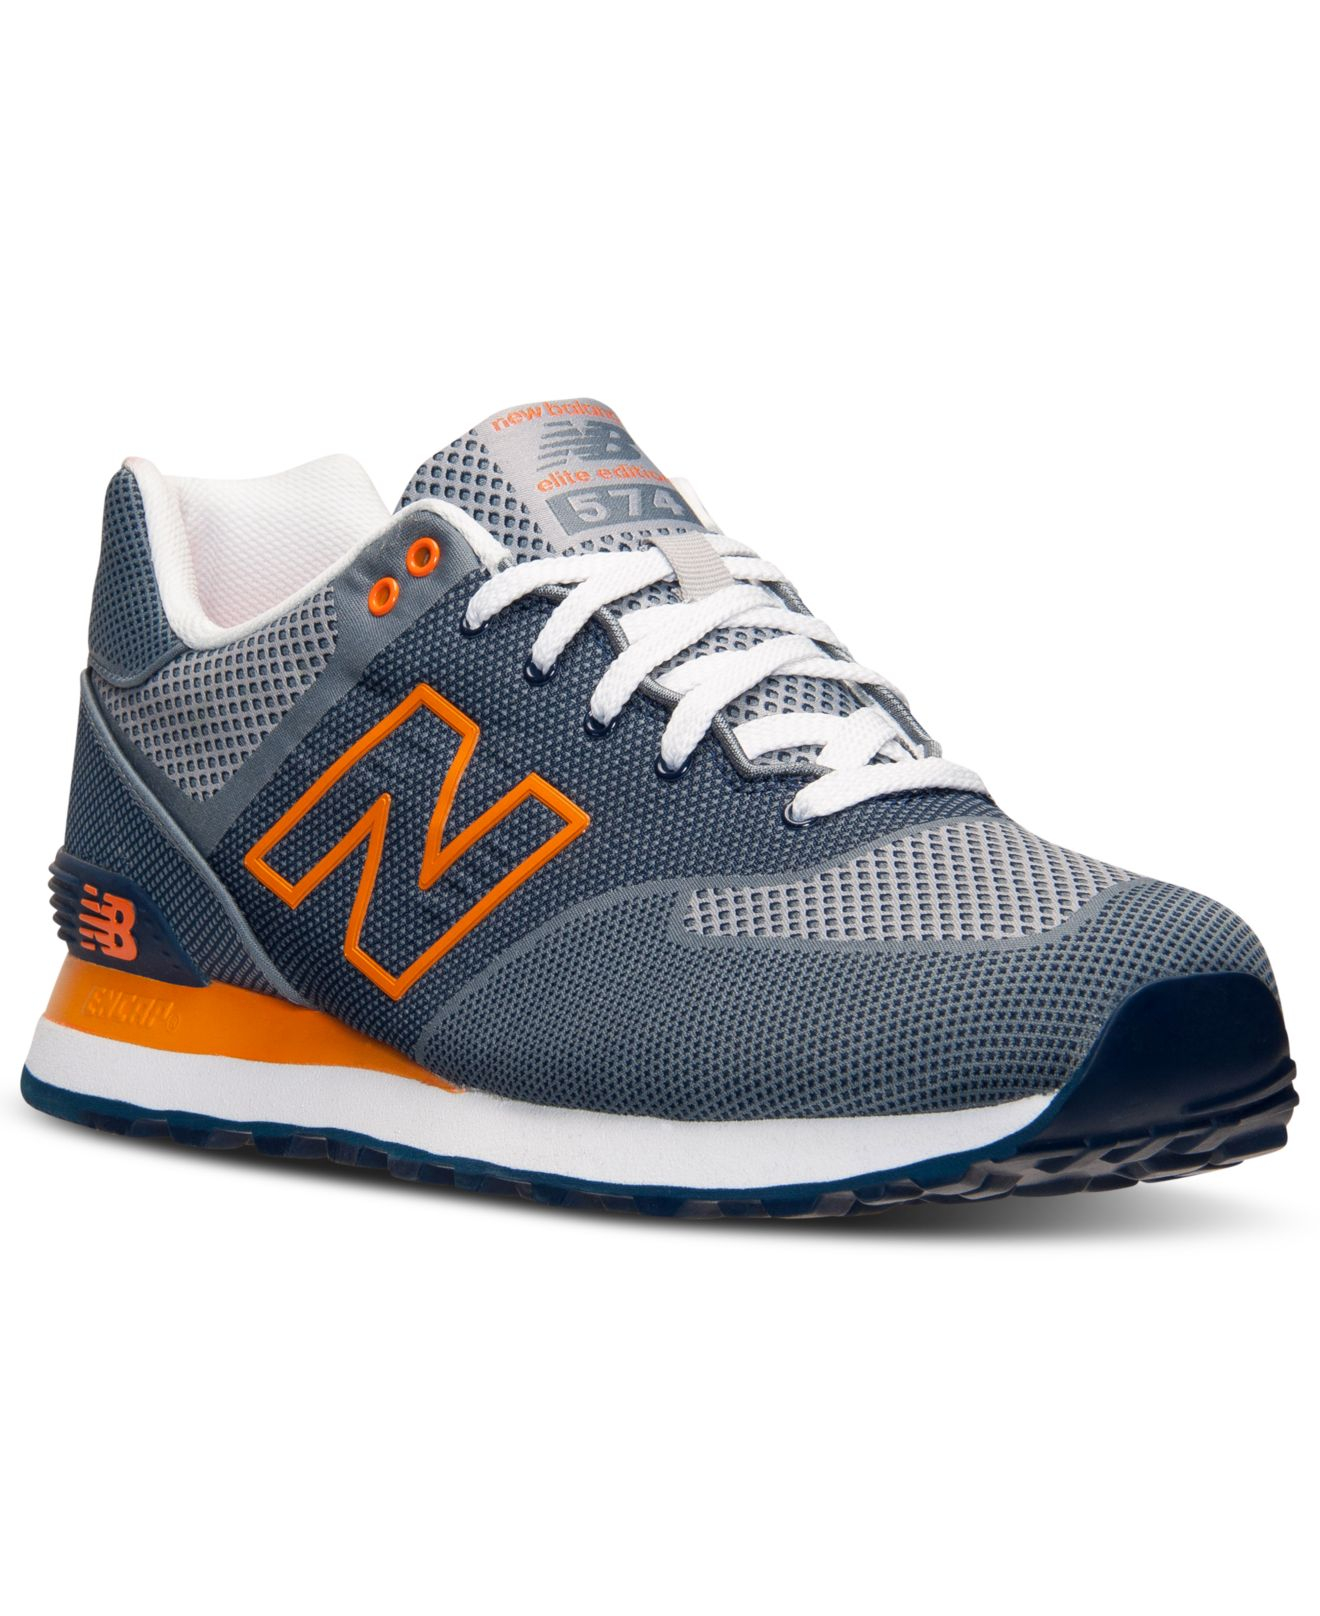 Lyst - New Balance Men's 574 Woven Casual Sneakers From Finish Line in